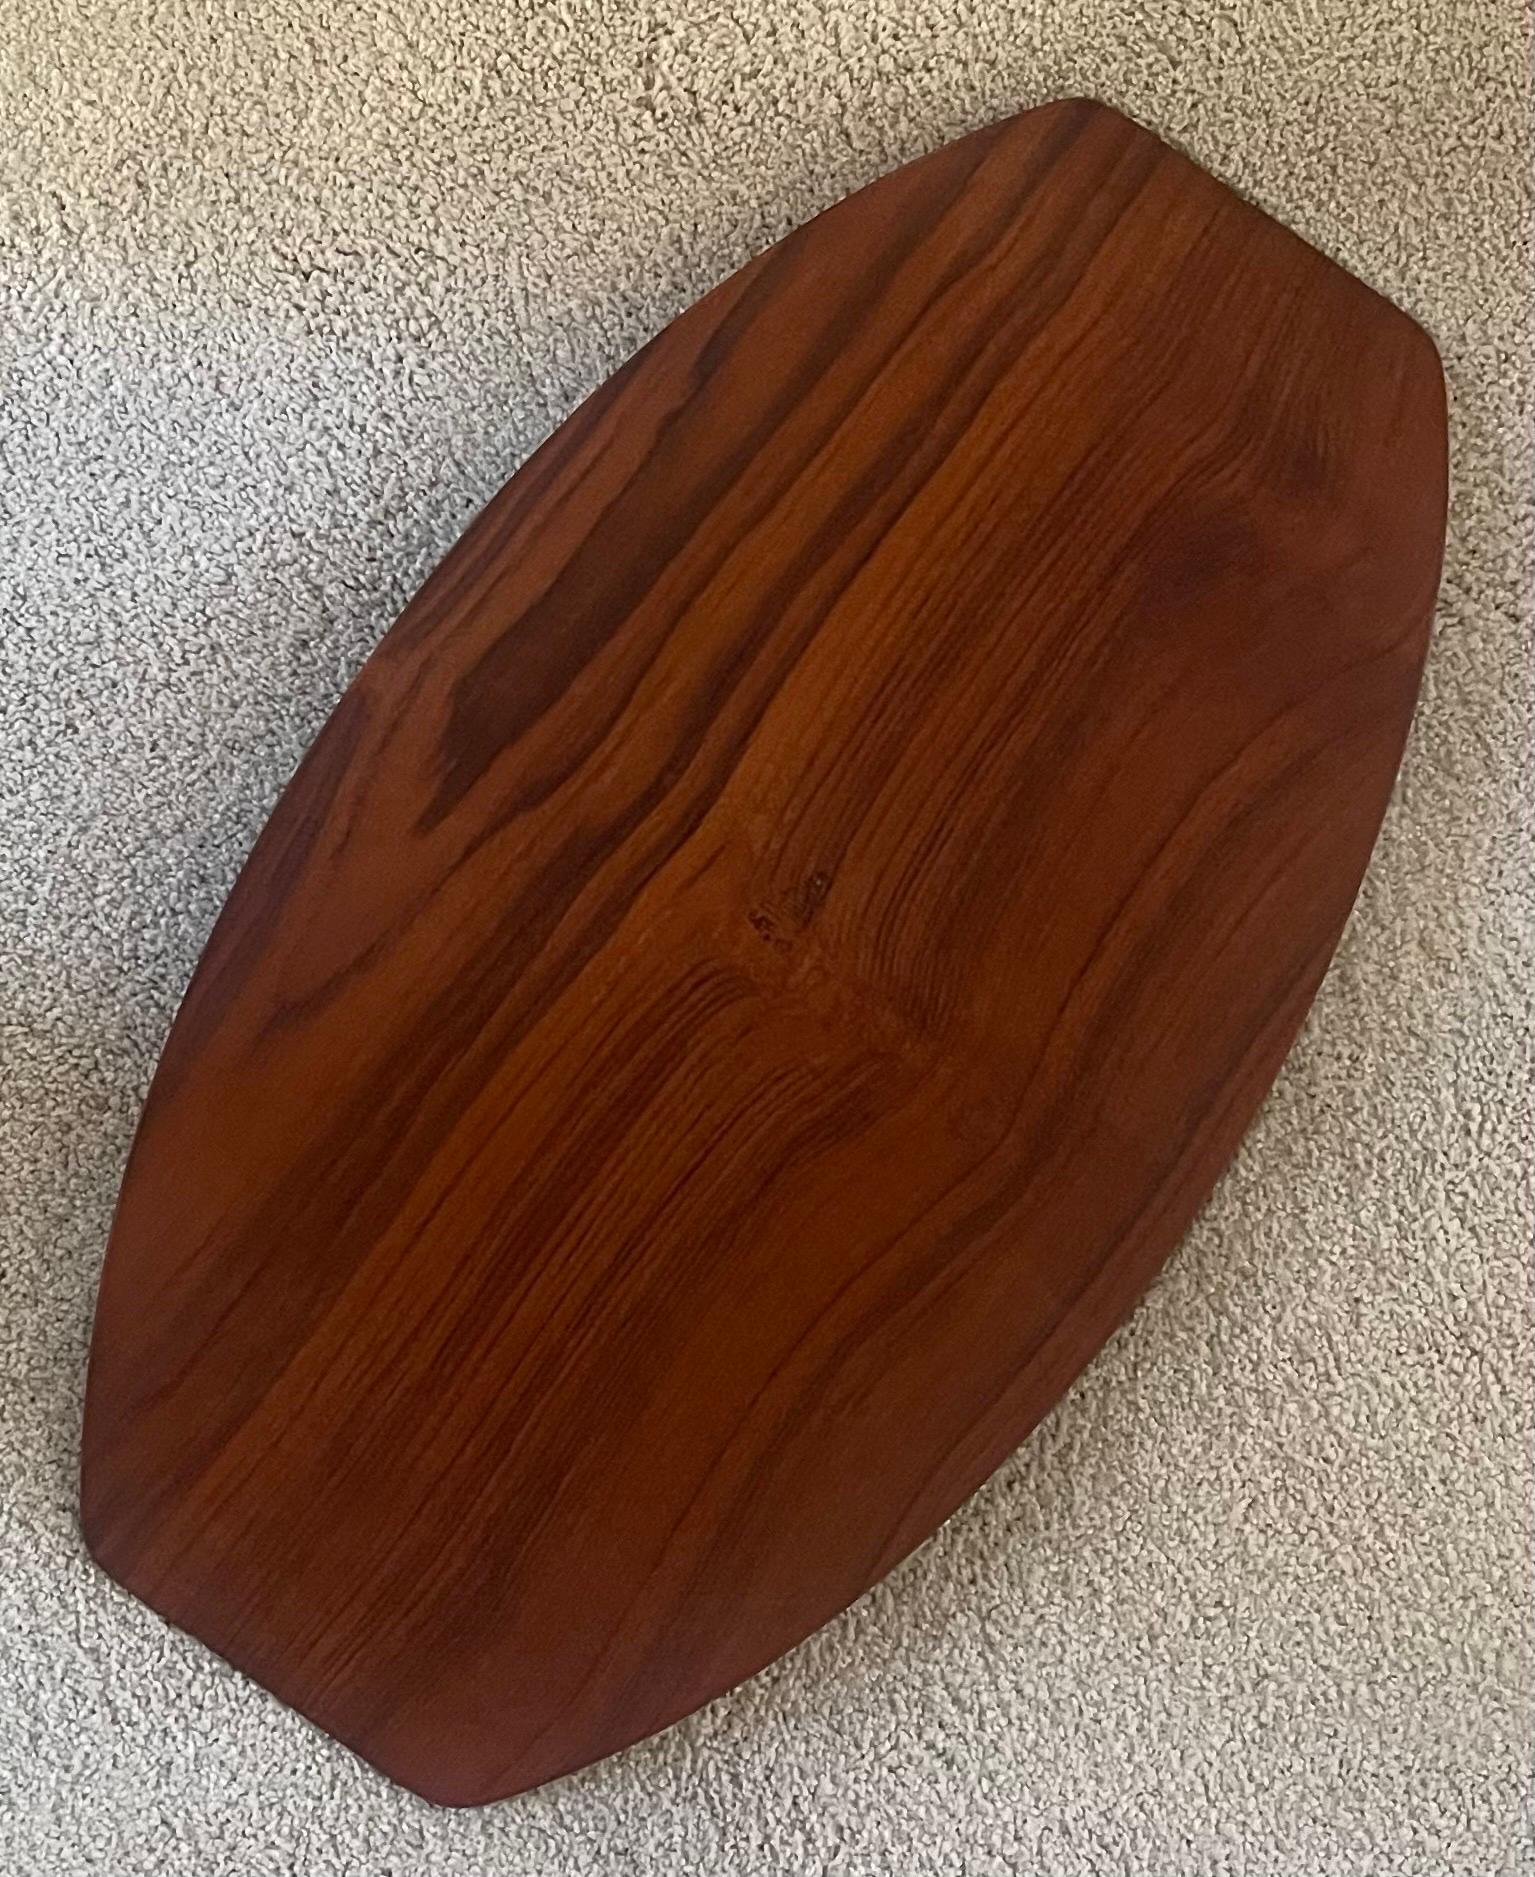 Large Solid Teak Surfboard Tray with Raised Edge by Digsmed - Rare For Sale 1